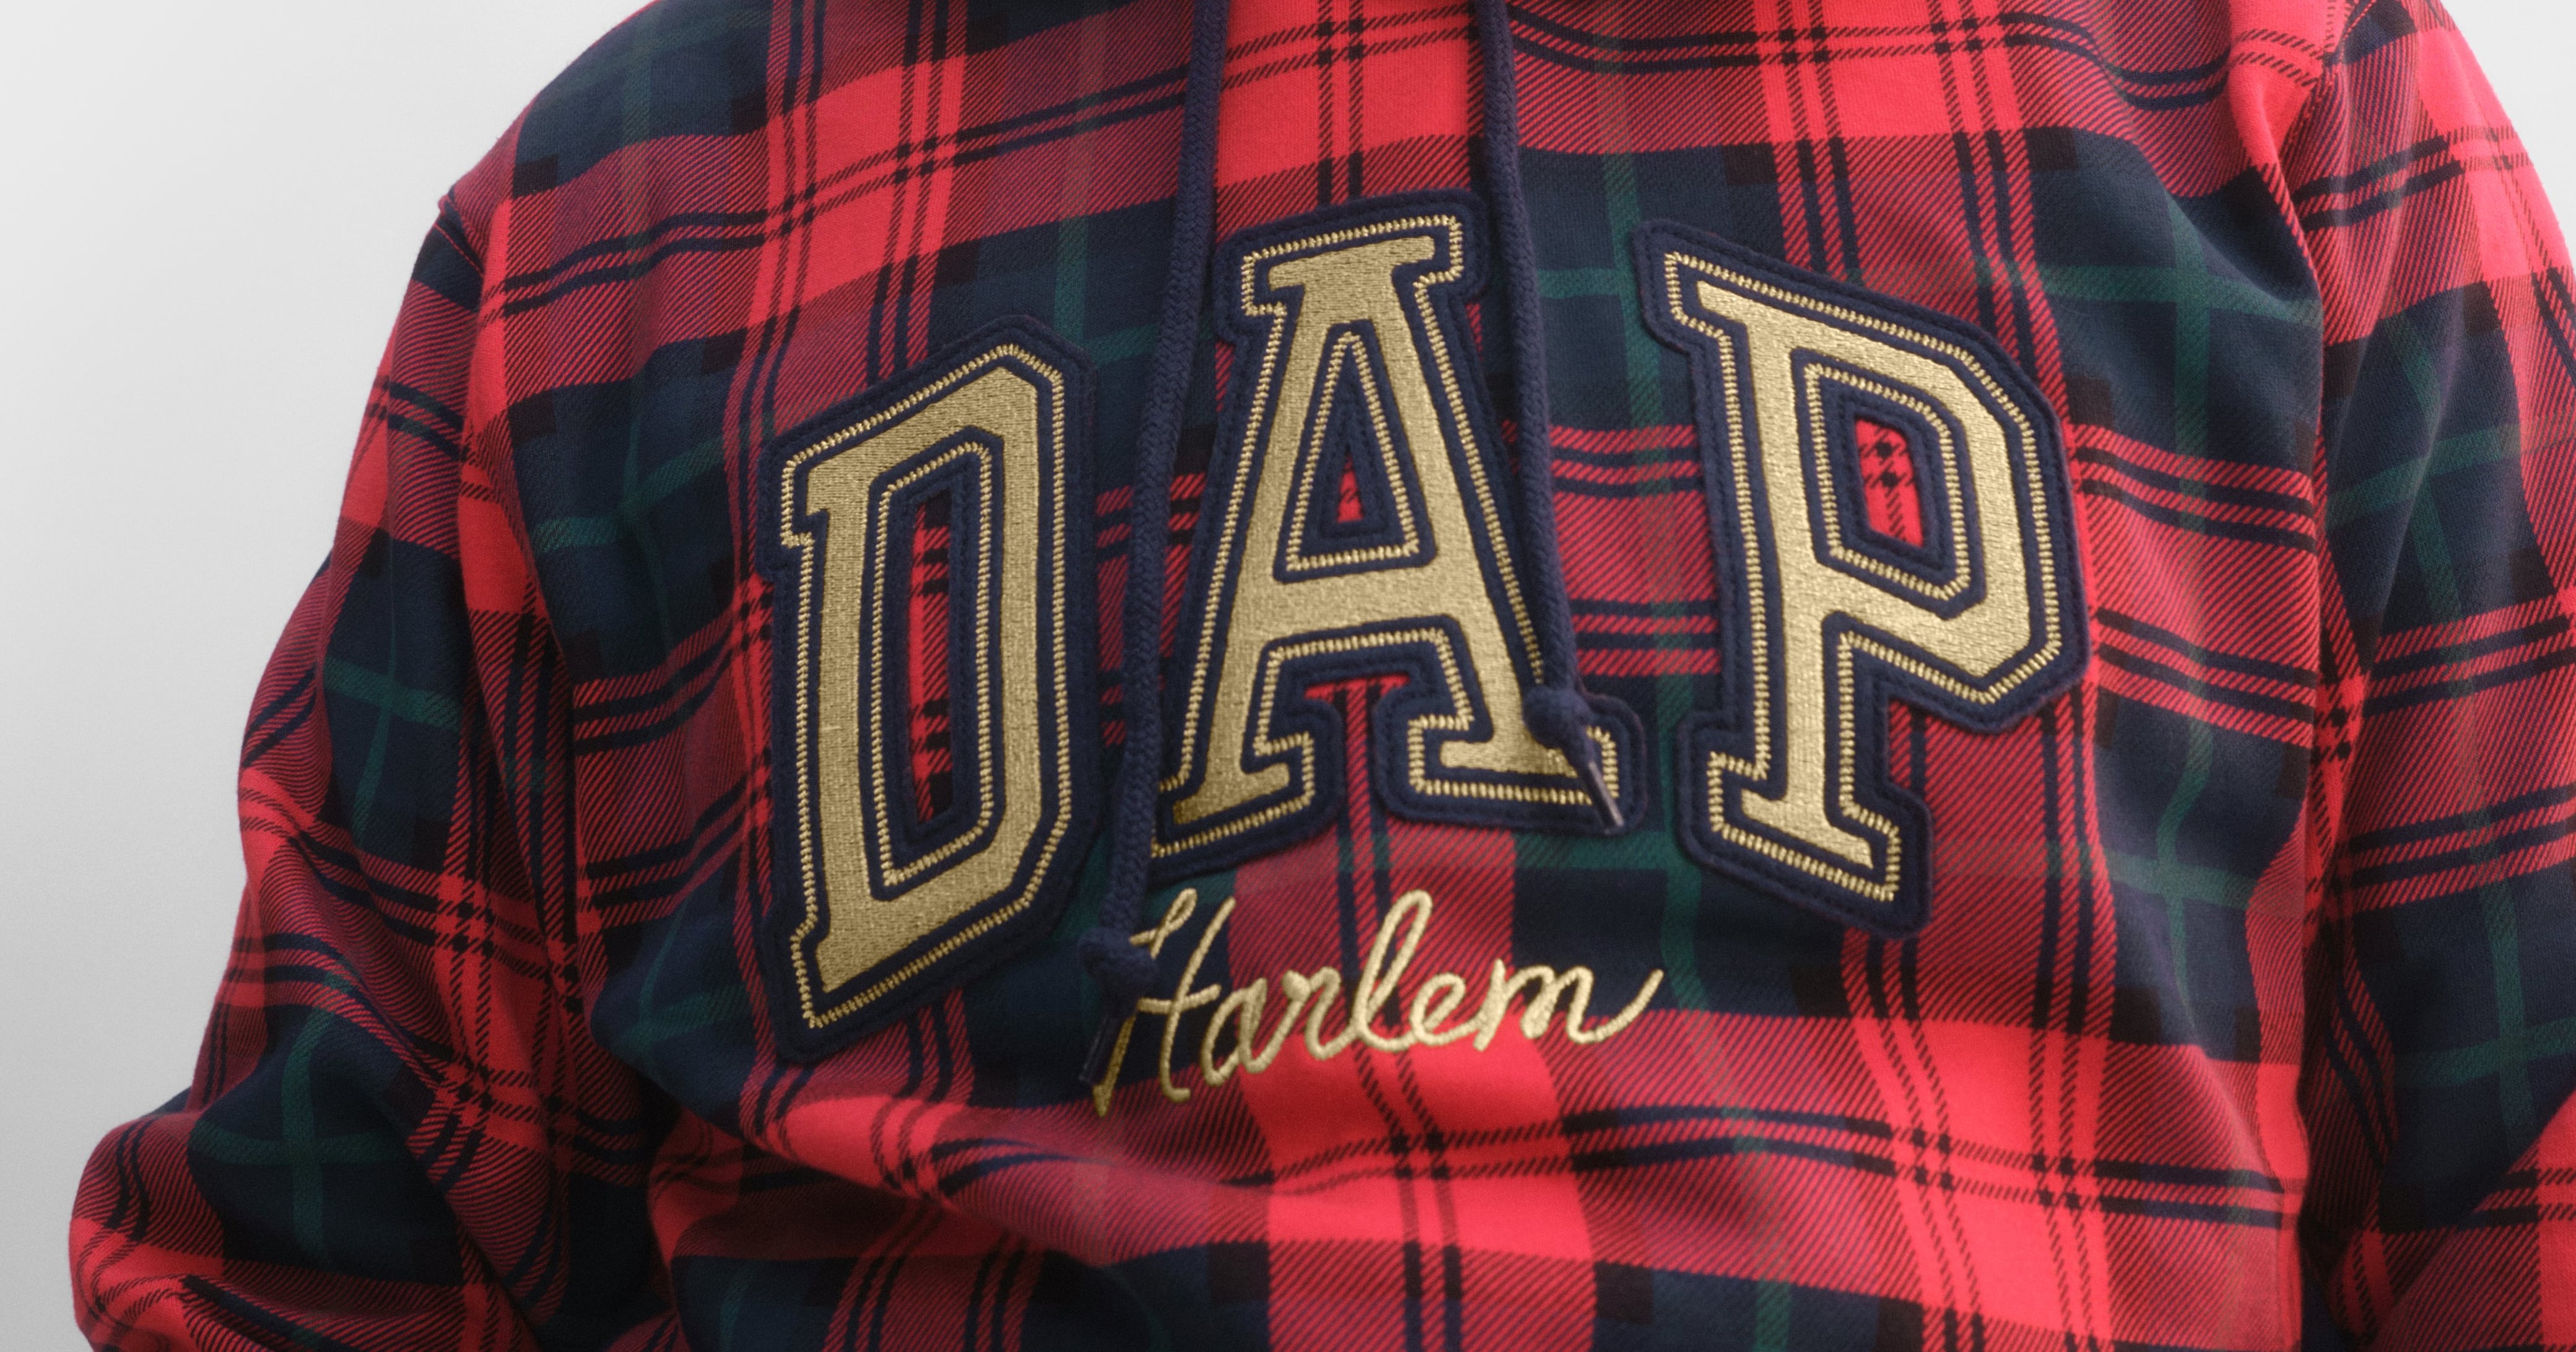 Shop the Limited Edition Dapper Dan x Gap Hoodie Collection